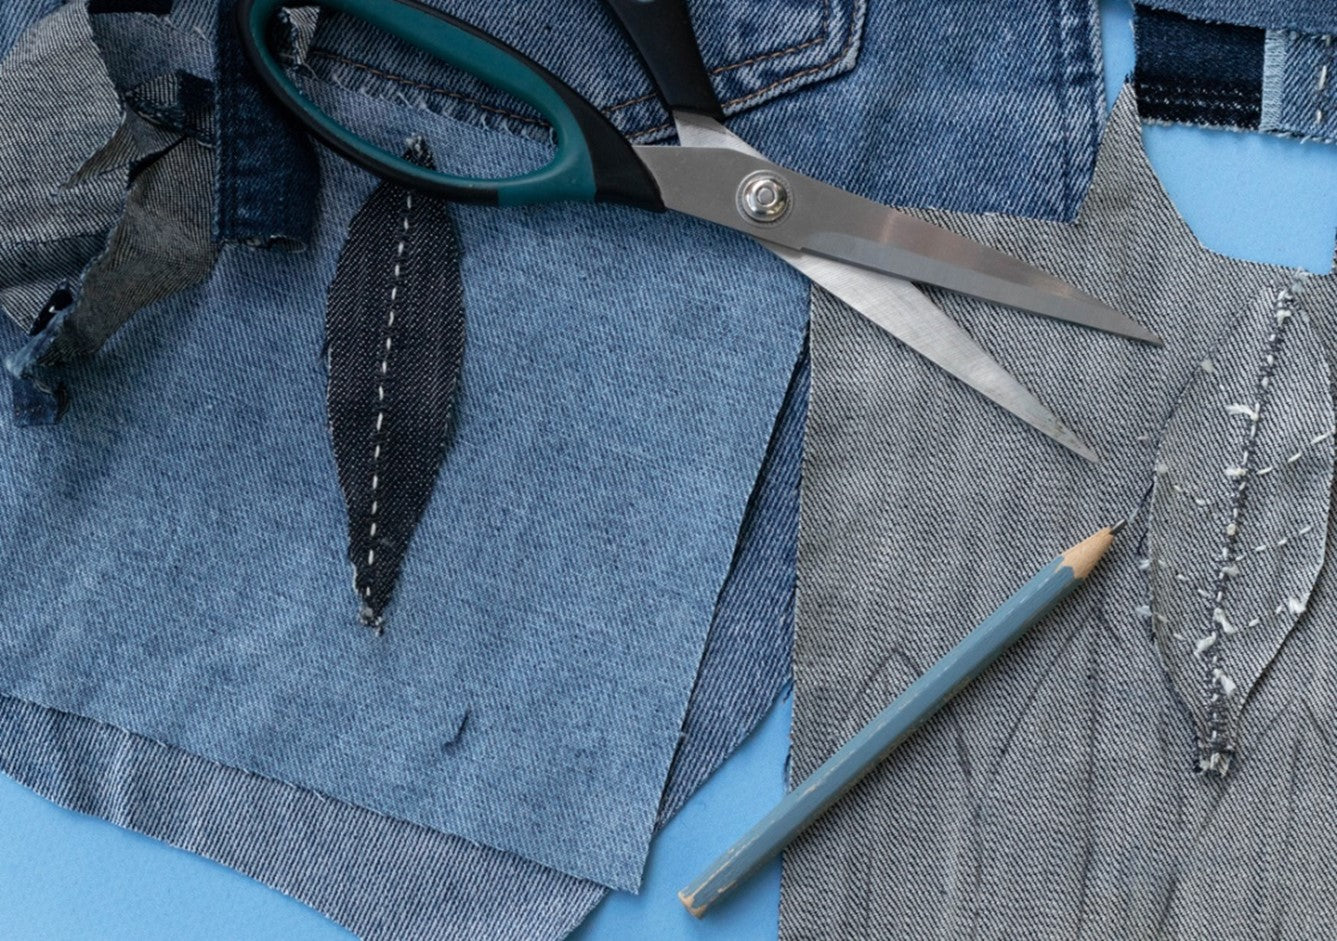 Creative Ideas for Upcycling Your Old Denim Jeans